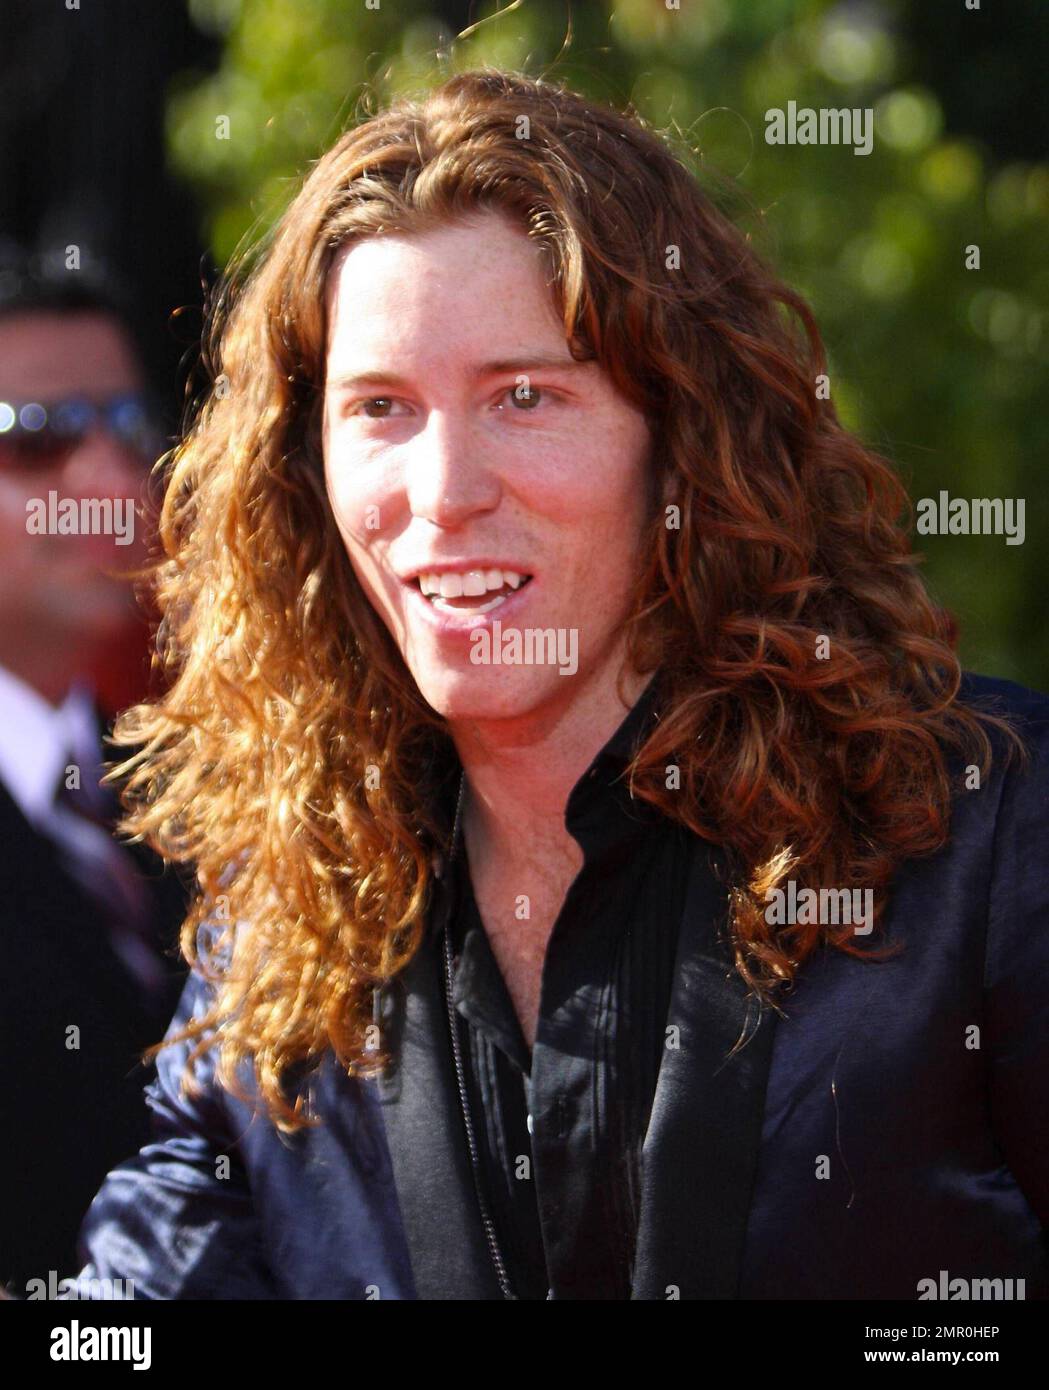 Professional snowboarder Shaun White walks the red carpet for the 2010 ESPY  Awards held at Nokia Theatre L.A. Live on a sizzling hot day. Los Angeles,  CA. 07/14/10 Stock Photo - Alamy